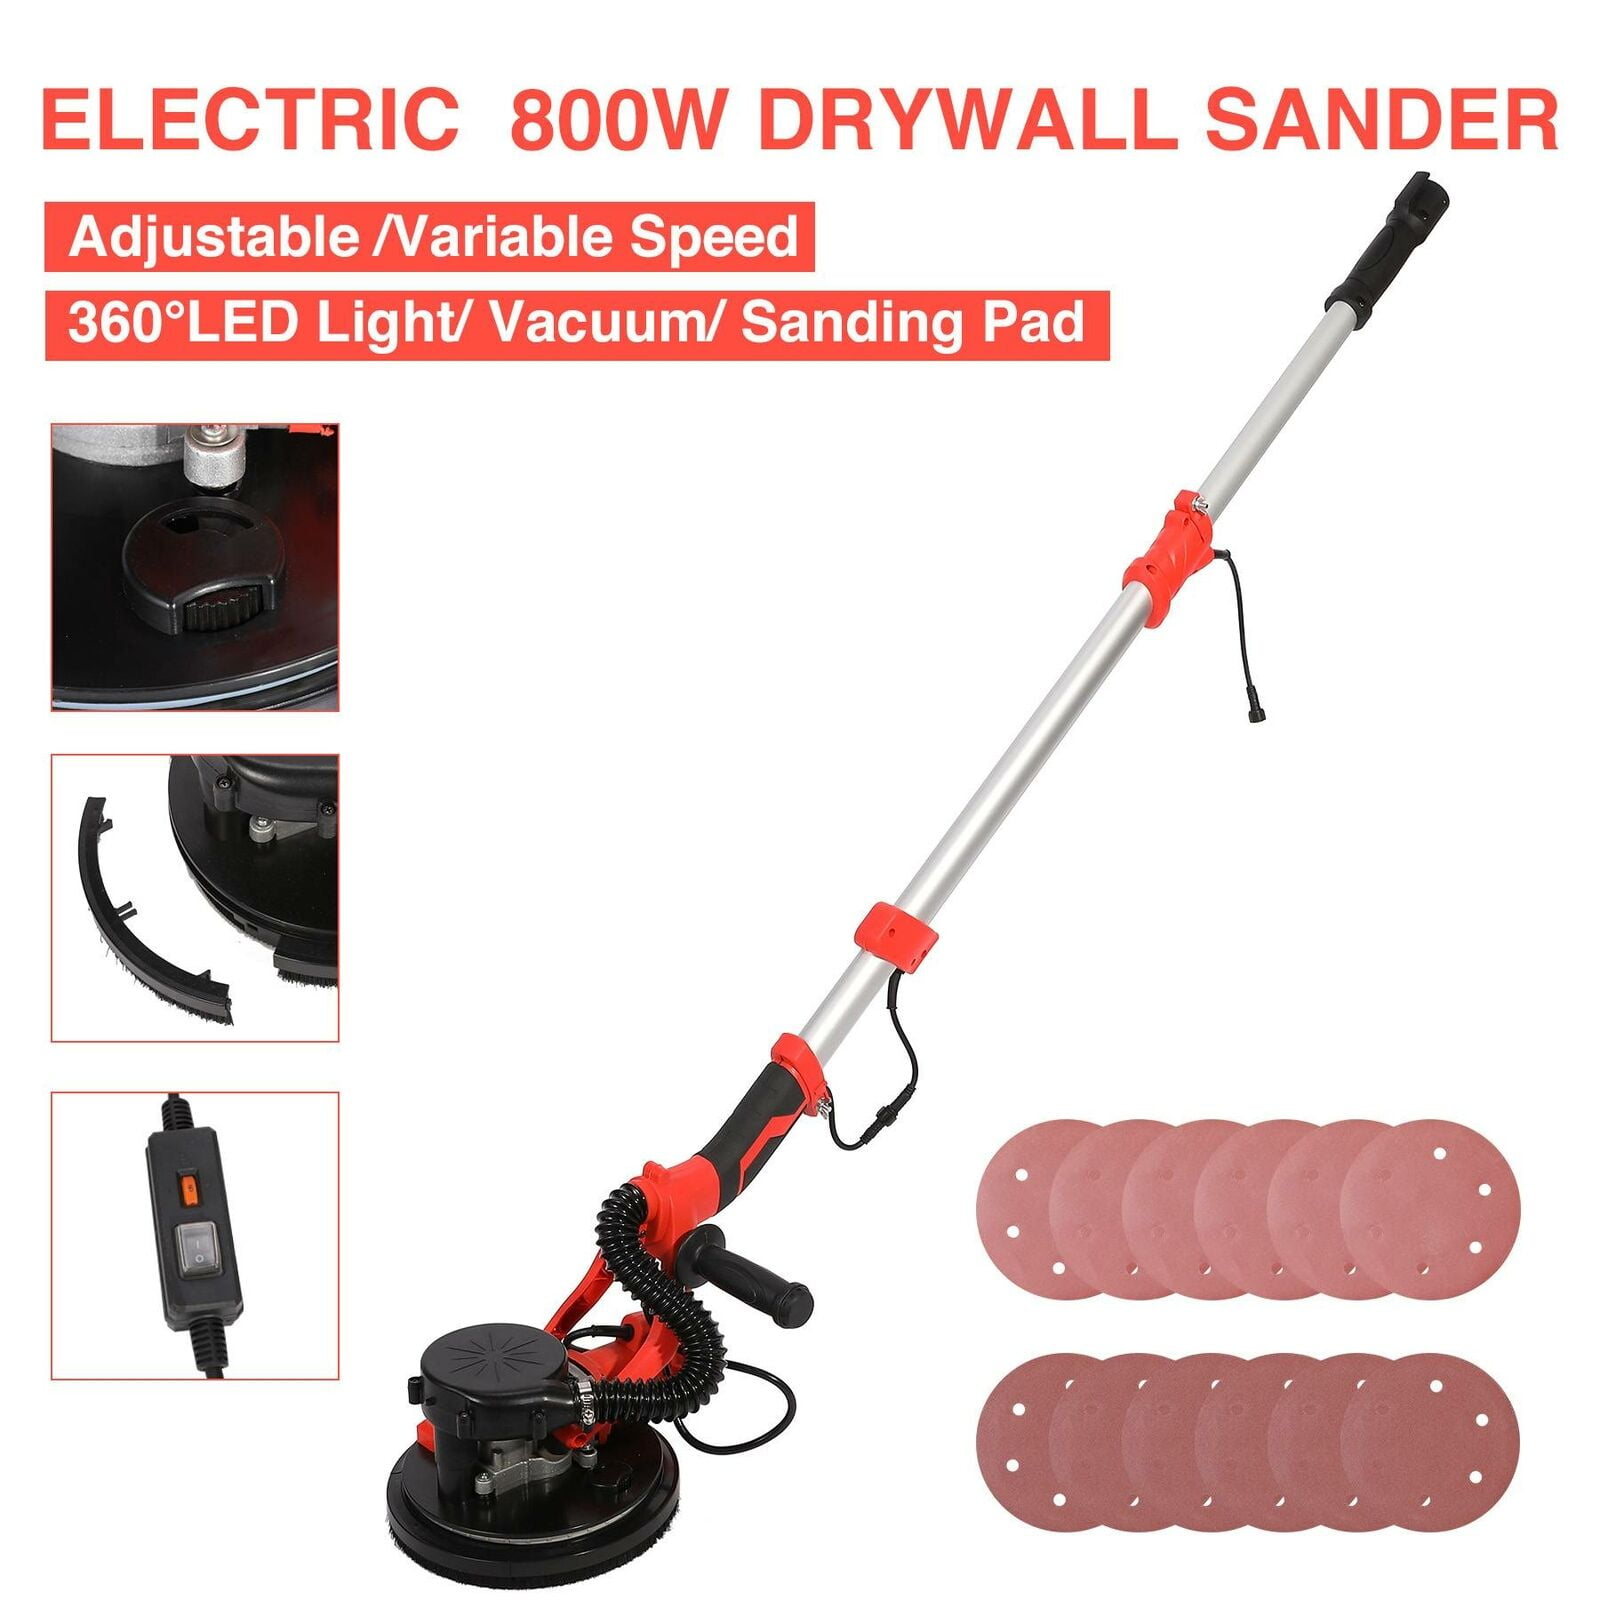 Electric Drywall Sander Pole Dustless Vacuum Variable Speed Power Corded Pro NEW 